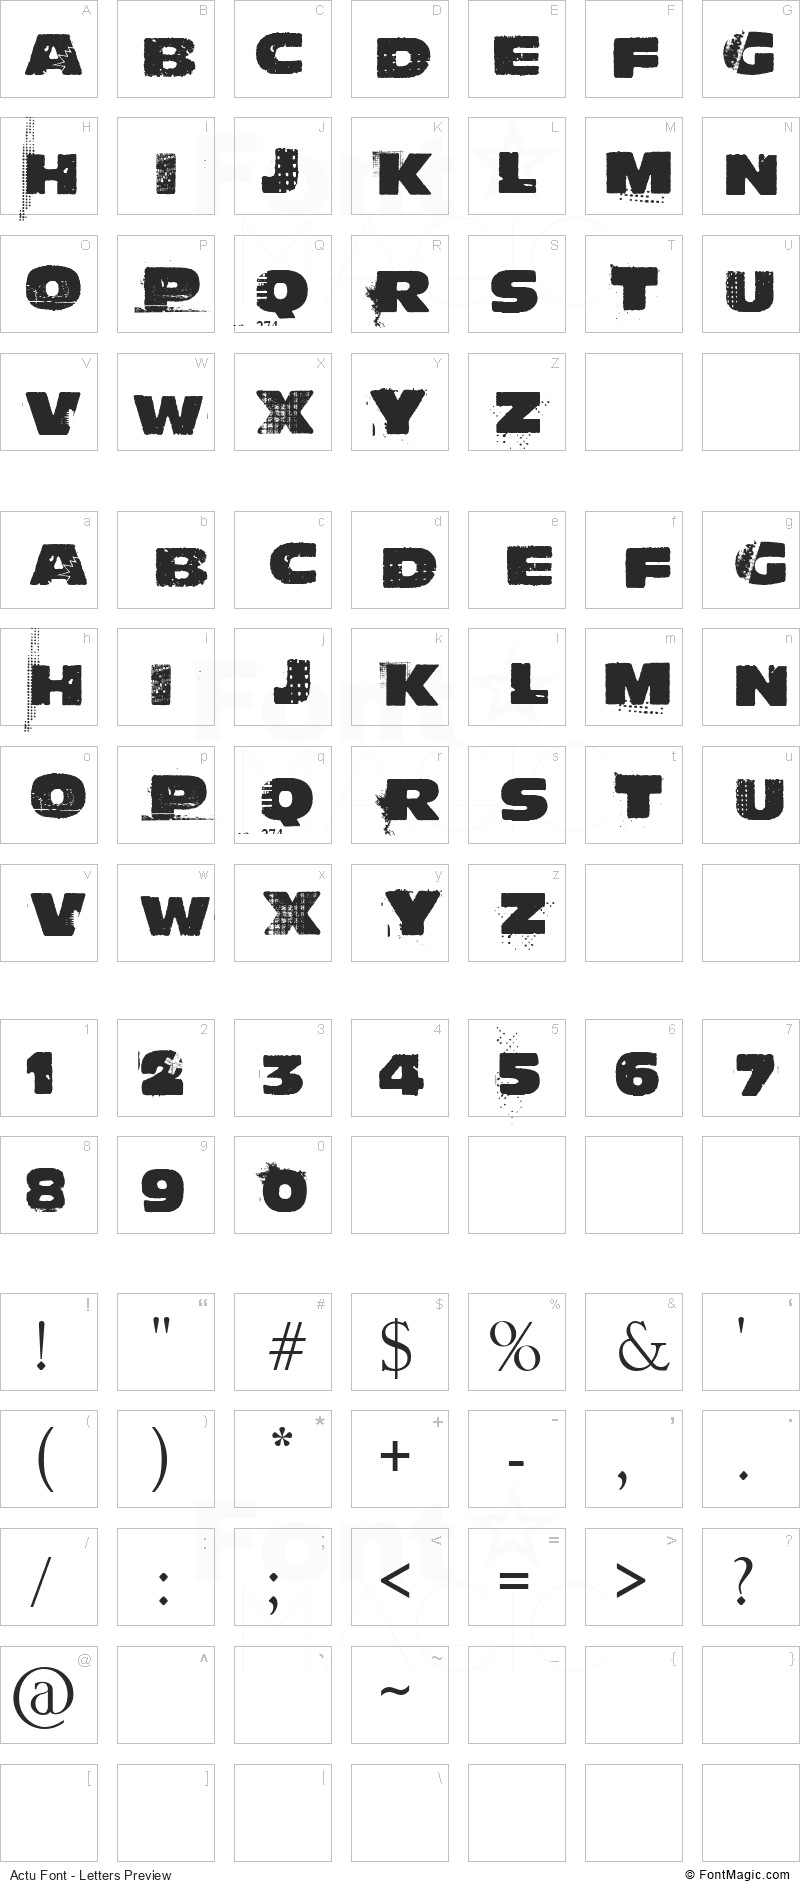 Actu Font - All Latters Preview Chart